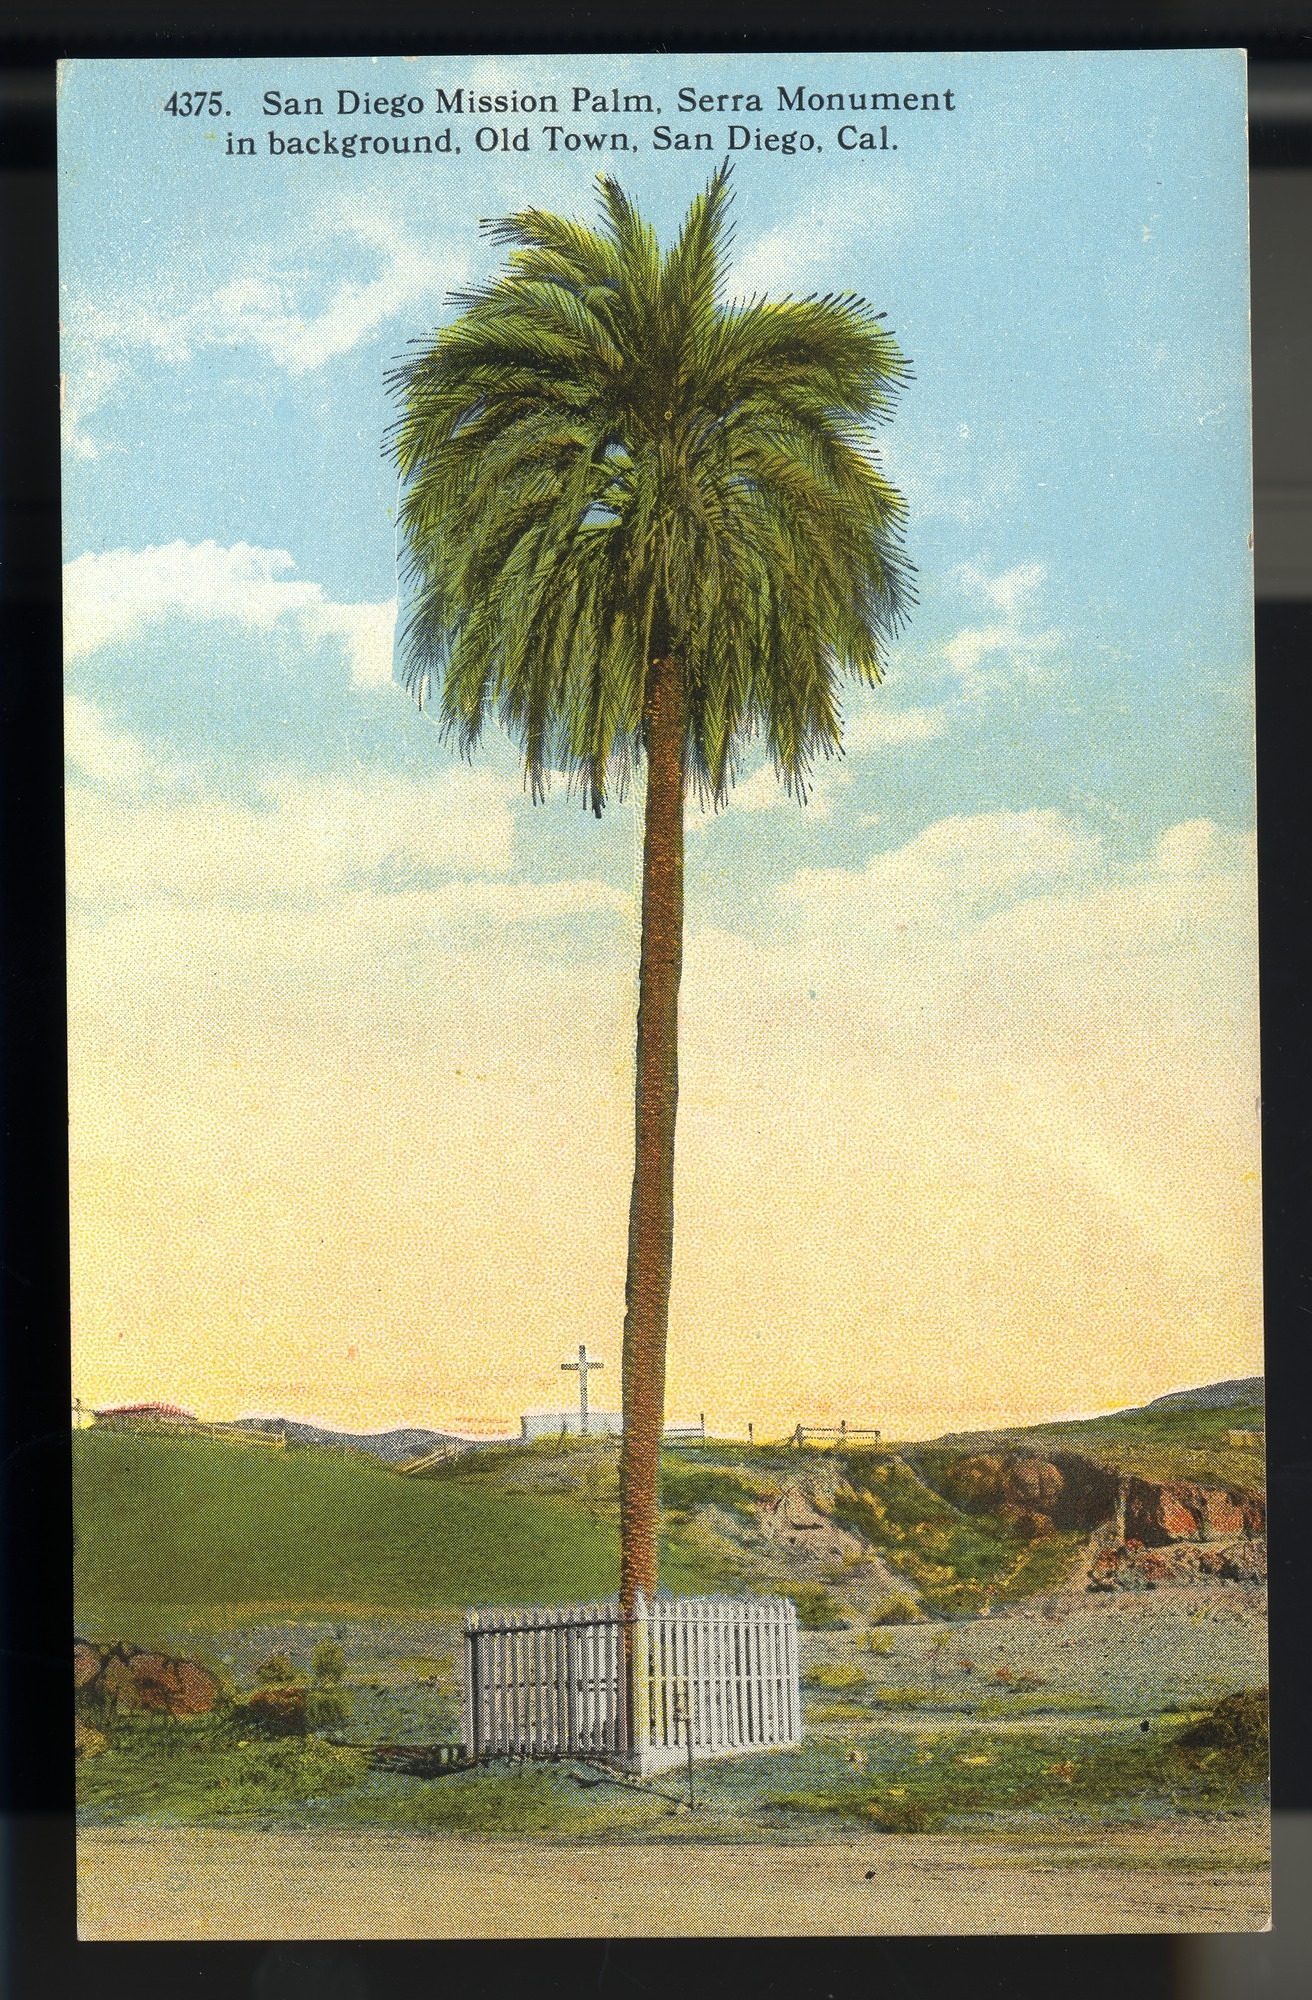 Postcard 03 – San Diego Mission Palm, Serra Monument in background, Old Town, San Diego, Cal. H. L. Christiance Company. ca 1915. NMAH 1986.0639.0672.